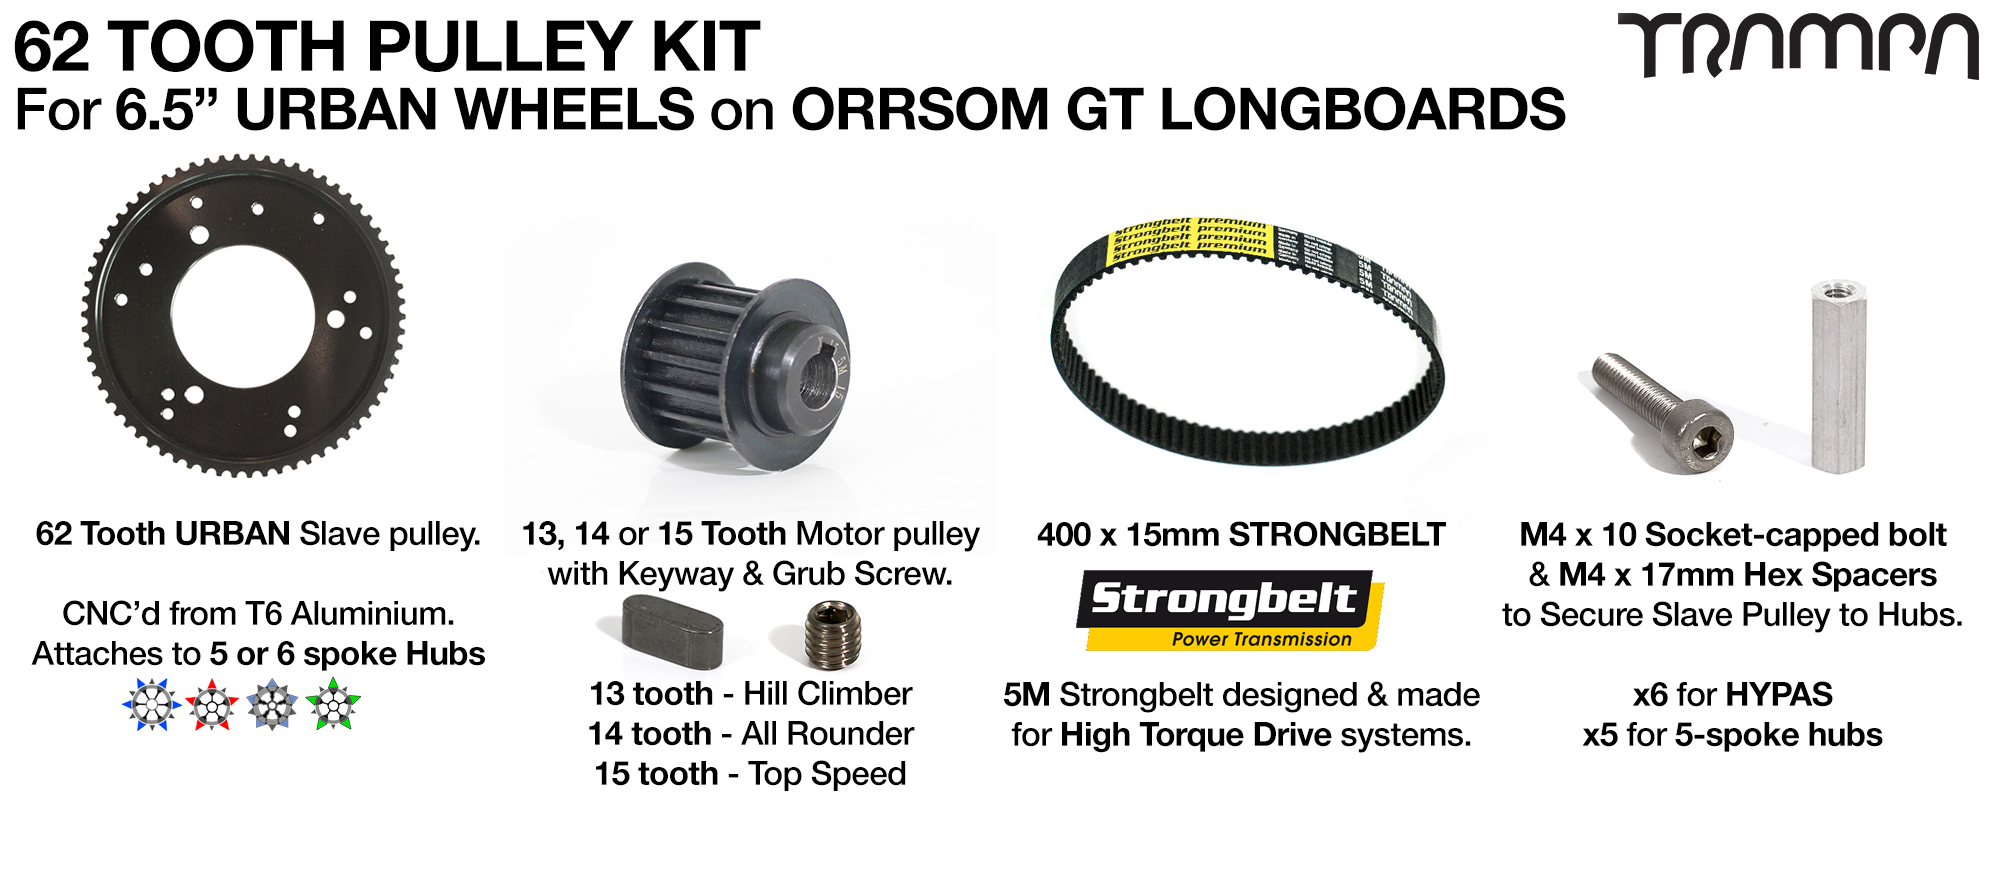 12FiFties Trucks ORRSOM Longboard Pulley kit with 62 Tooth Slave & 415mm x 15mm Belt to fit 6.5 Inch URBAN TREADS Tyres